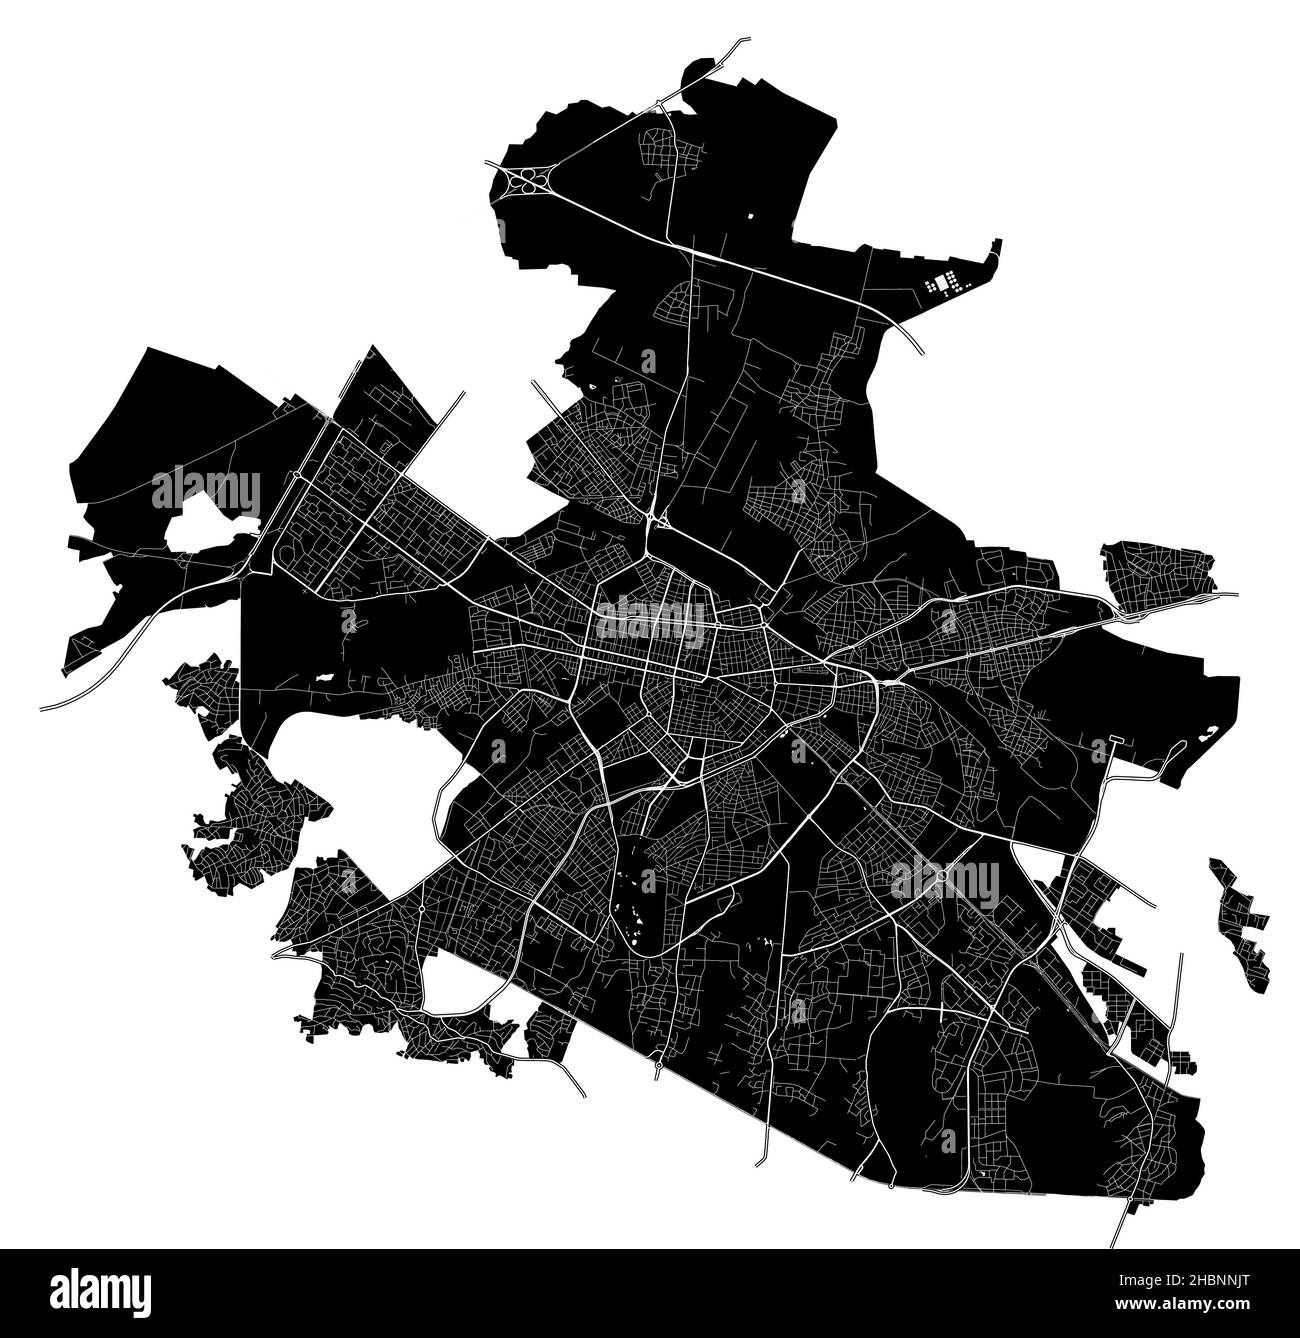 София, Bulgaria, high resolution vector map with city boundaries, and editable paths. The city map was drawn with white areas and lines for main roads Stock Vector